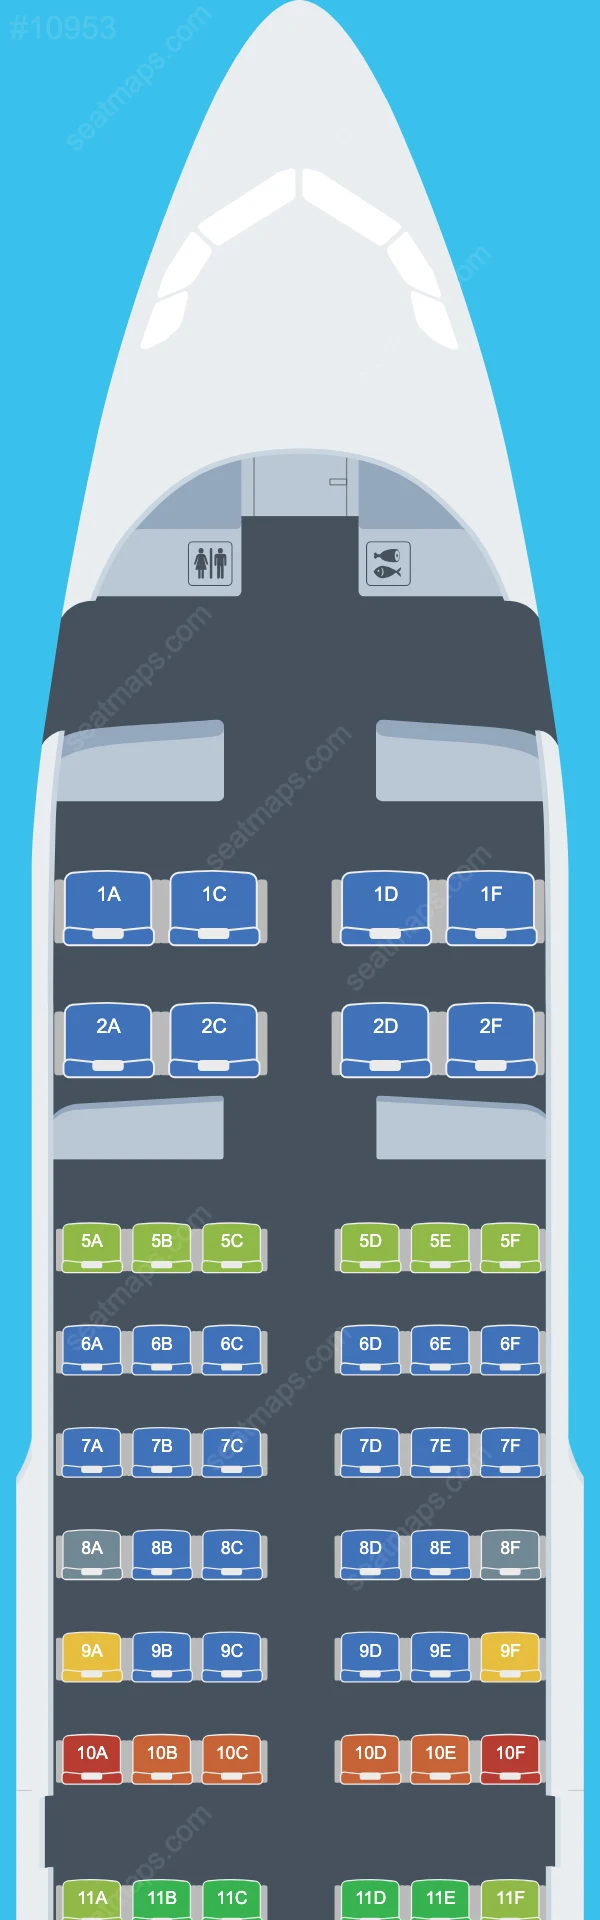 Himalaya Airlines Airbus A319 Seat Maps A319-100